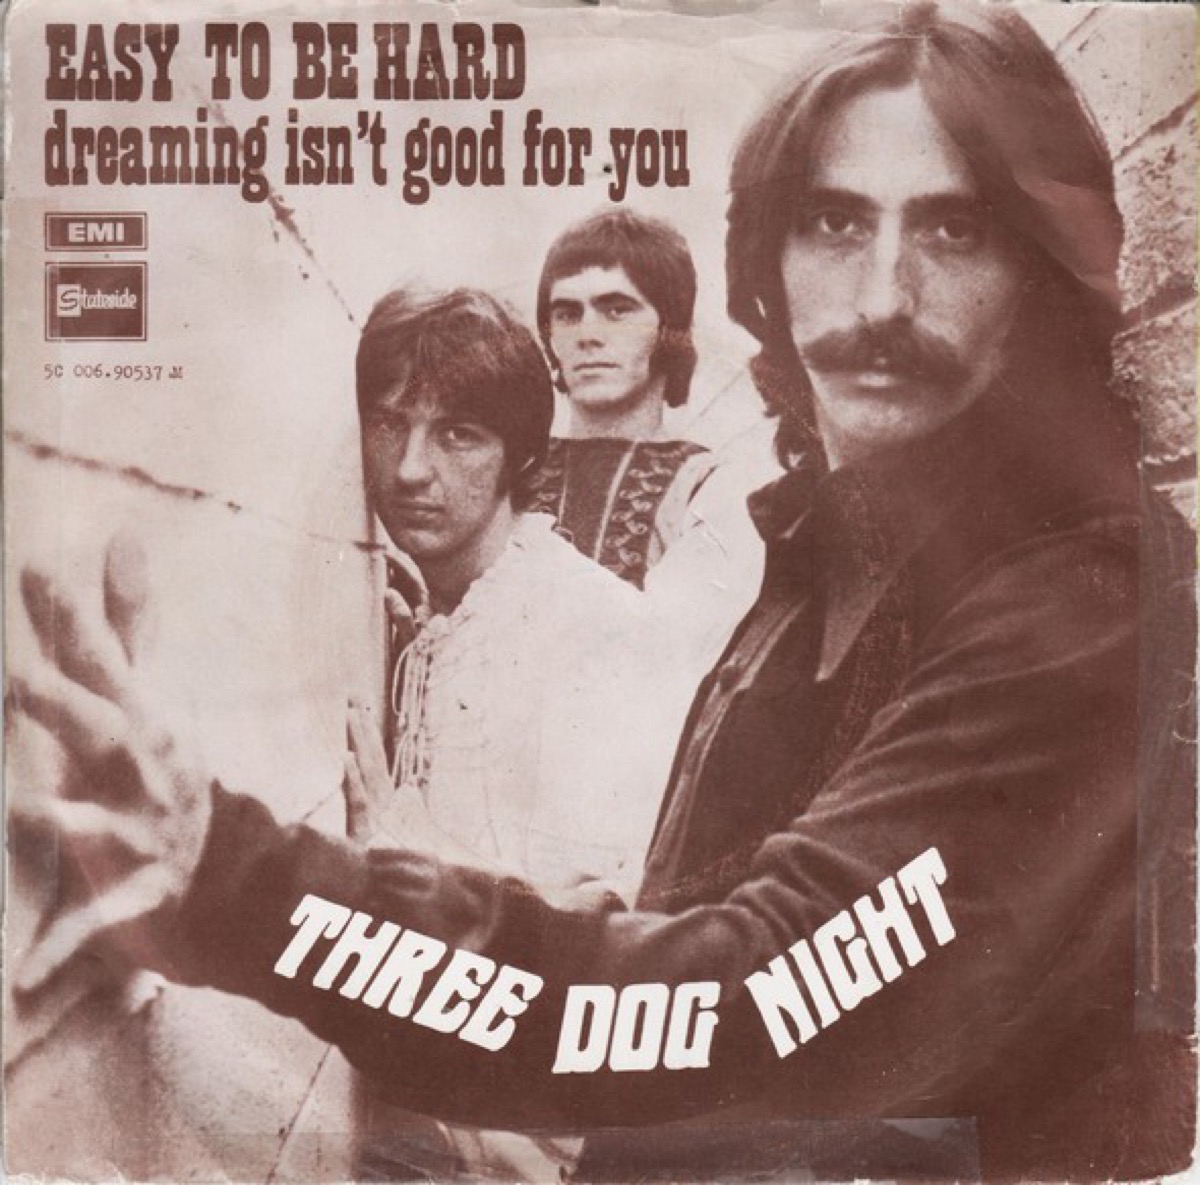 easy to be hard three dog night single cover, 1969 songs